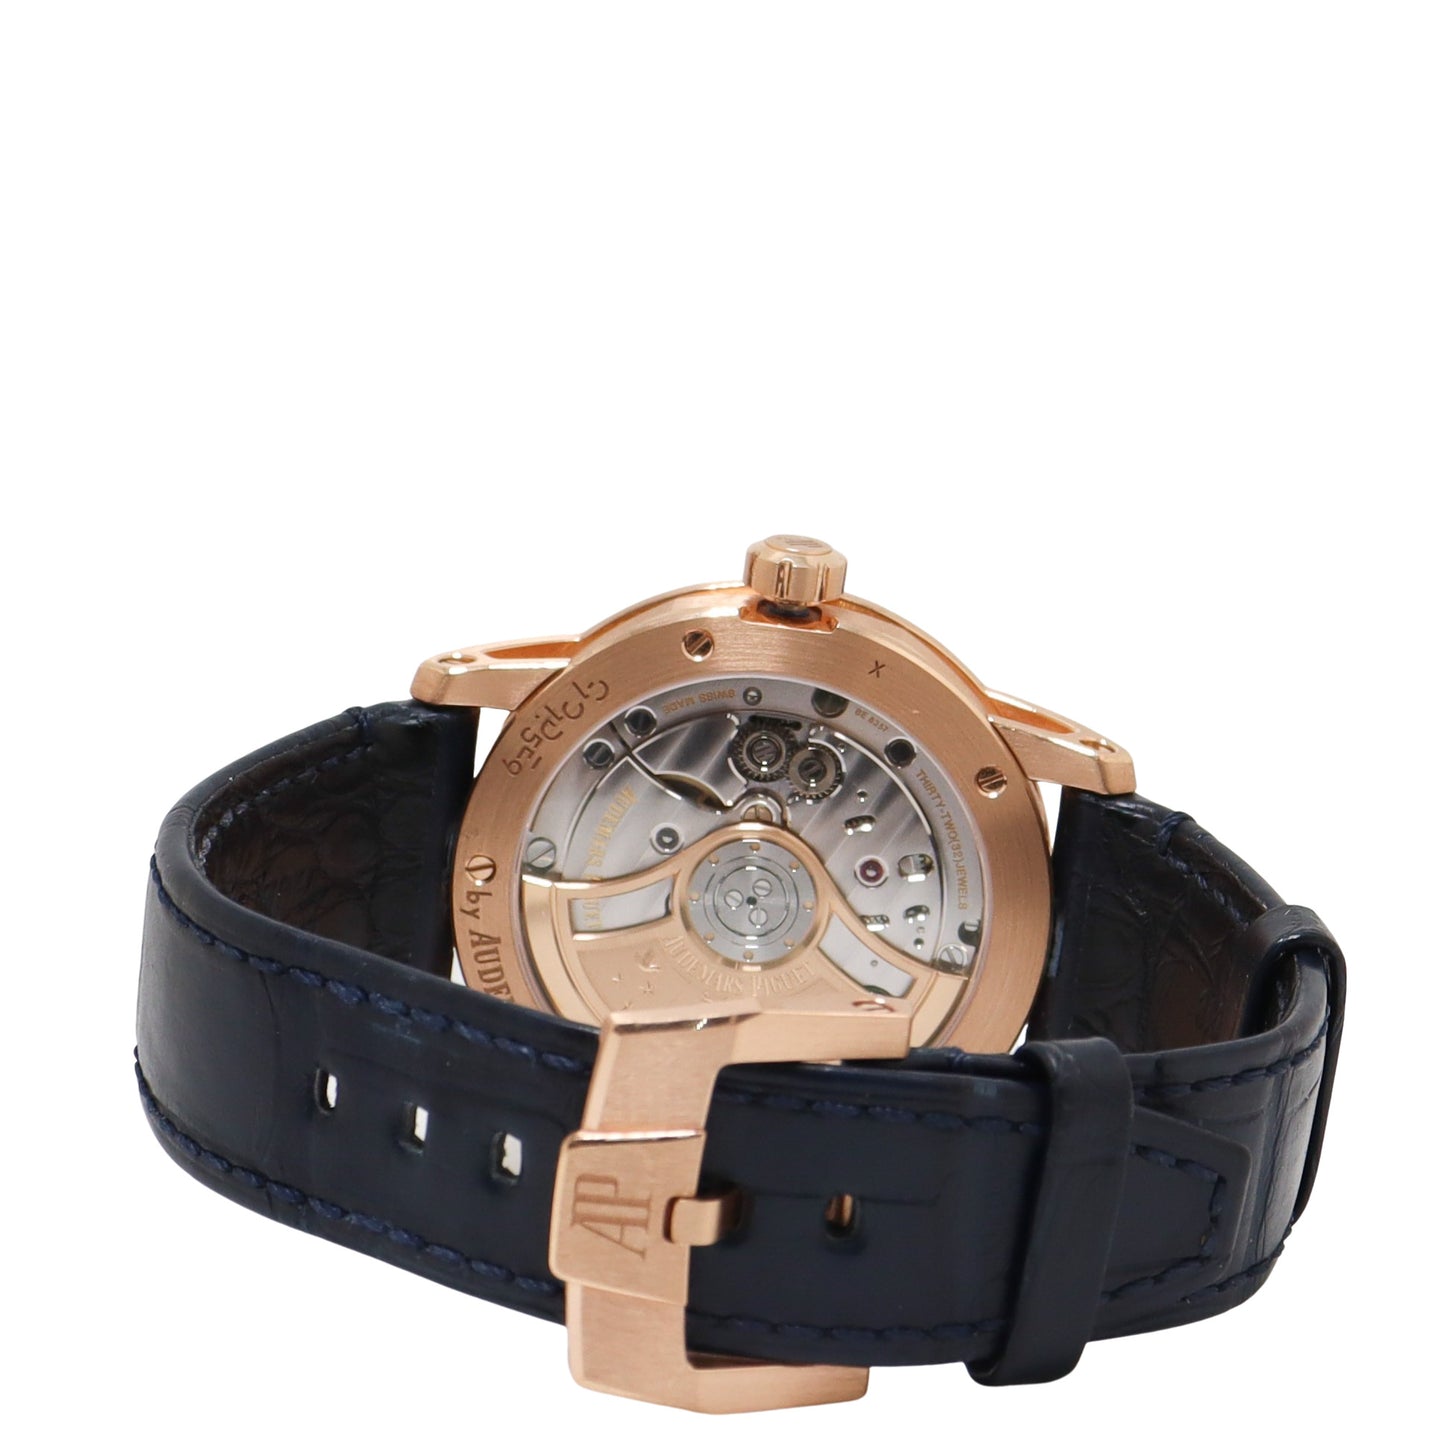 Audemars Piguet Code 11.59 Rose Gold 41mm Blue Arabic & Stick Dial Watch Reference# 15210OR.OO.A028CR.01 - Happy Jewelers Fine Jewelry Lifetime Warranty